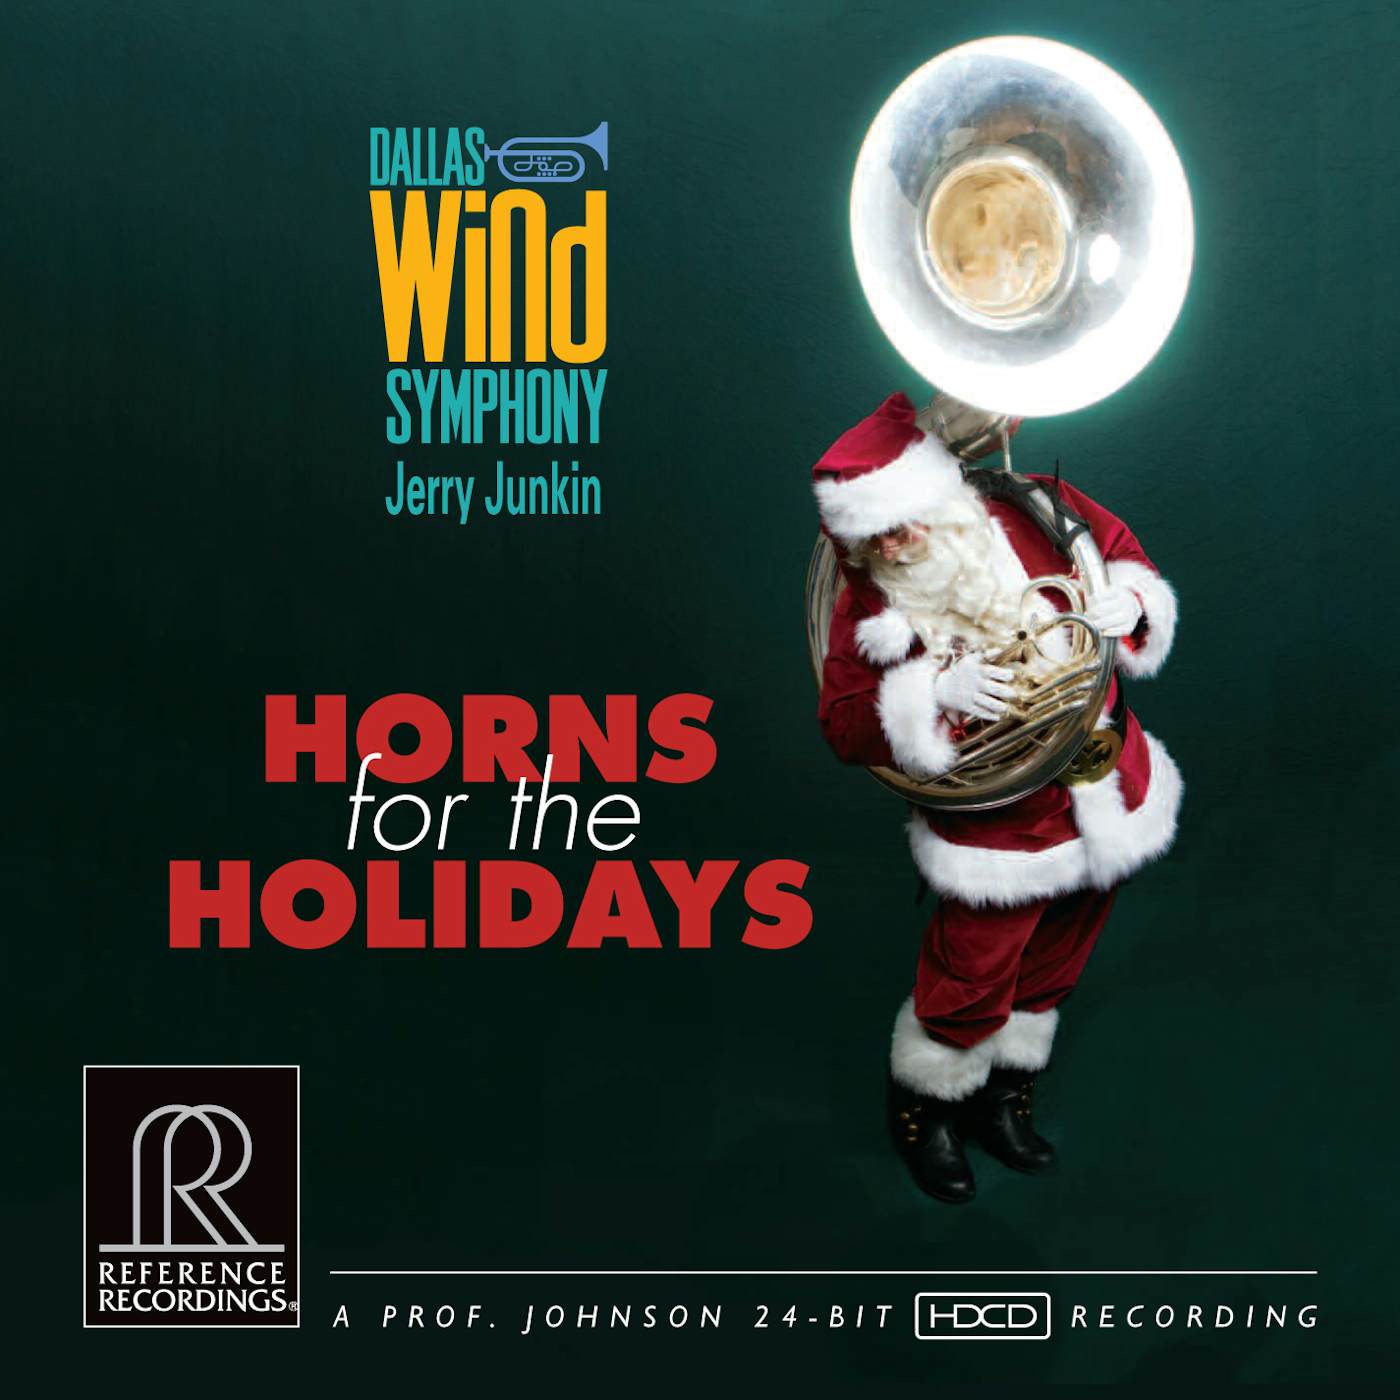 Dallas Wind Symphony HORNS FOR THE HOLIDAYS CD